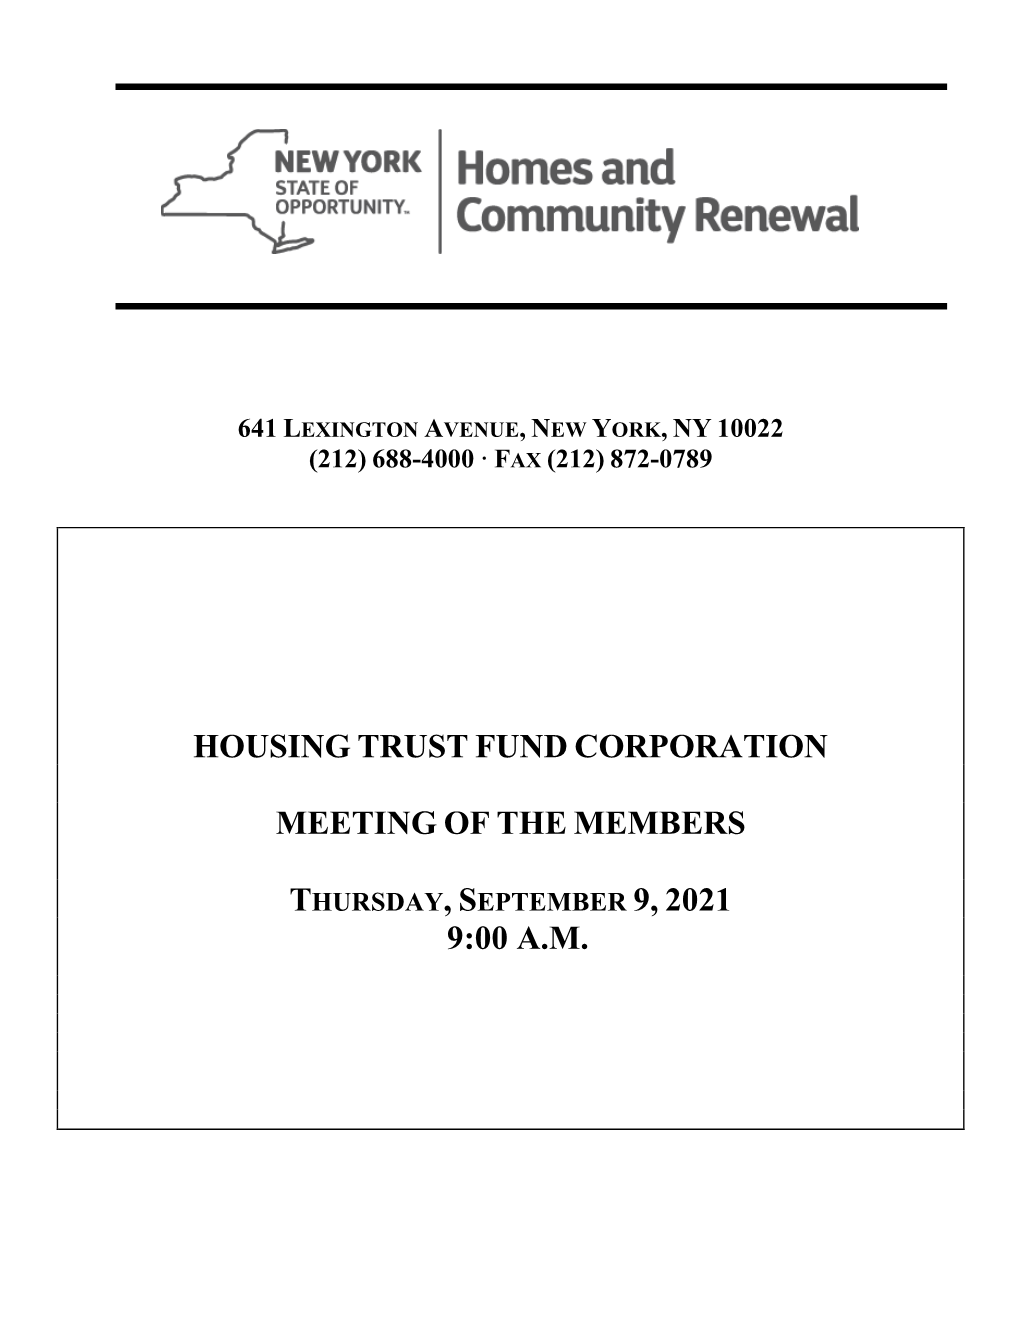 Housing Trust Fund Corporation Meeting of the Members Thursday